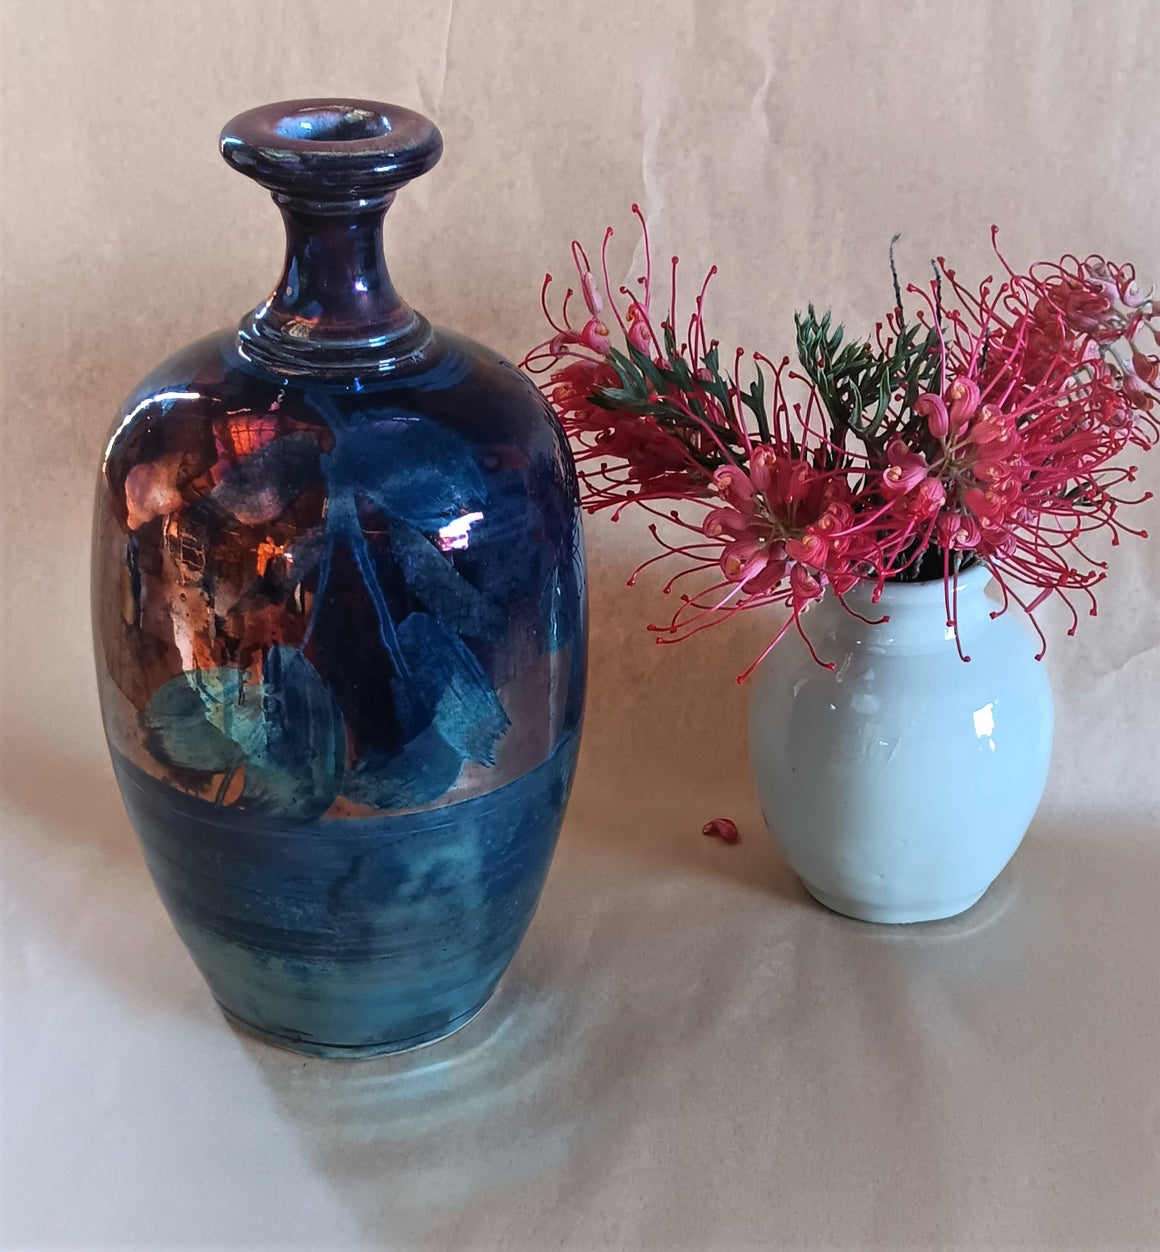 Luster Medium Vase 4. - Peter Wallace Pottery